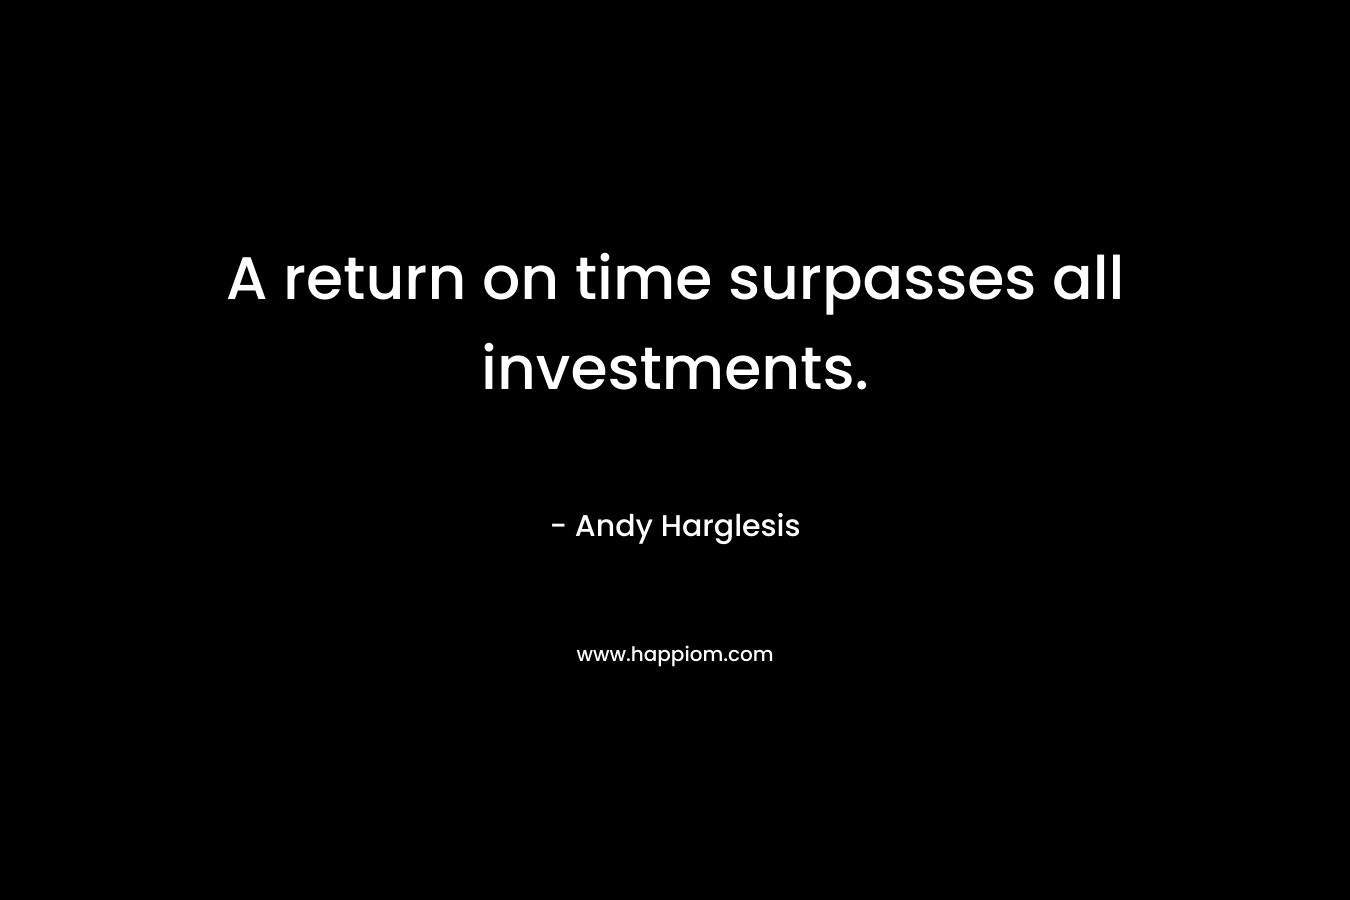 A return on time surpasses all investments.